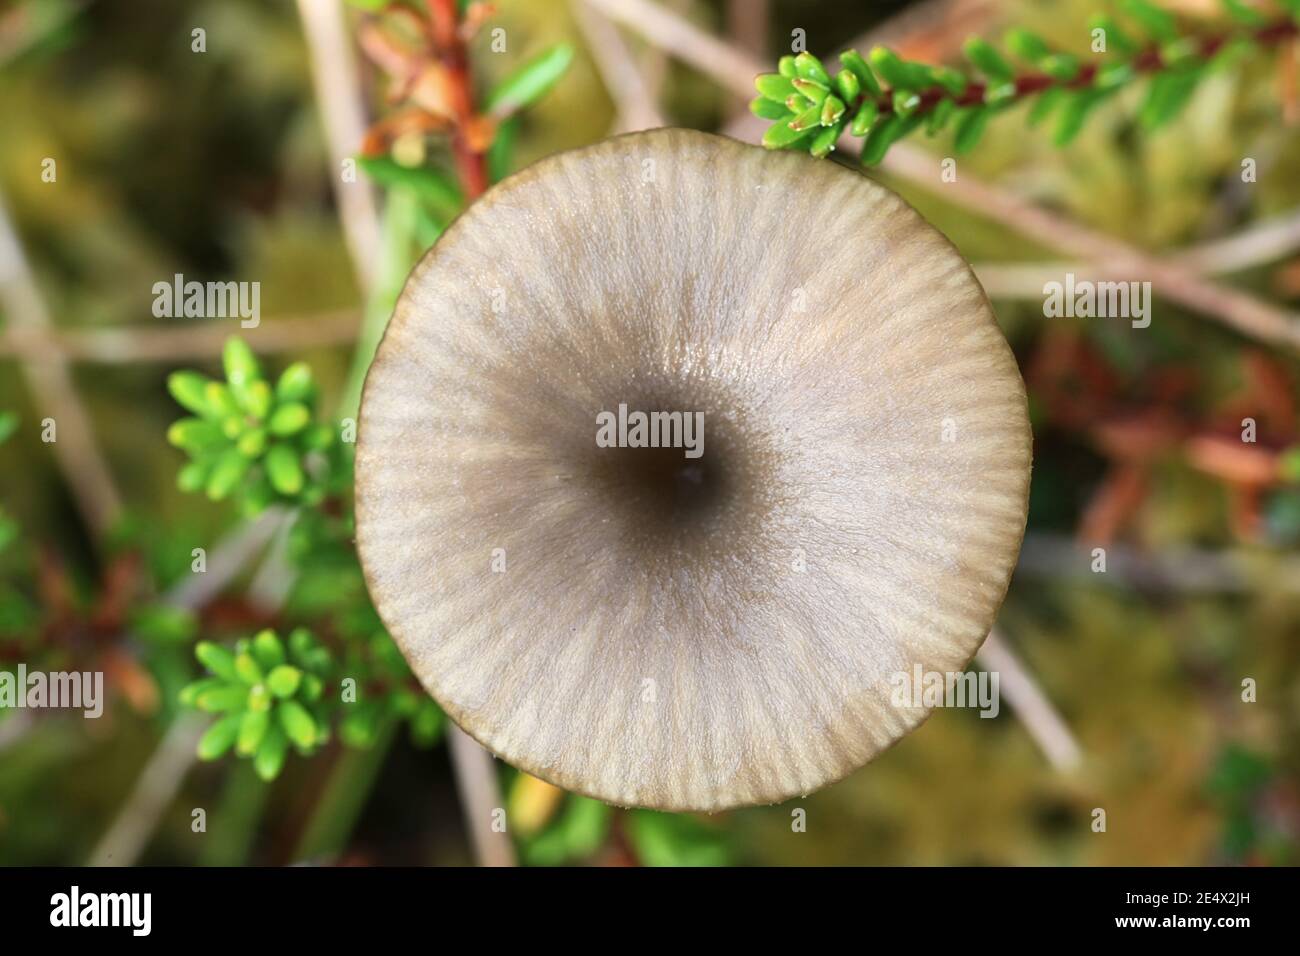 Arrhenia onisca, also called Omphalina oniscus, commonly called slater navel, wild mushroom from Finland Stock Photo